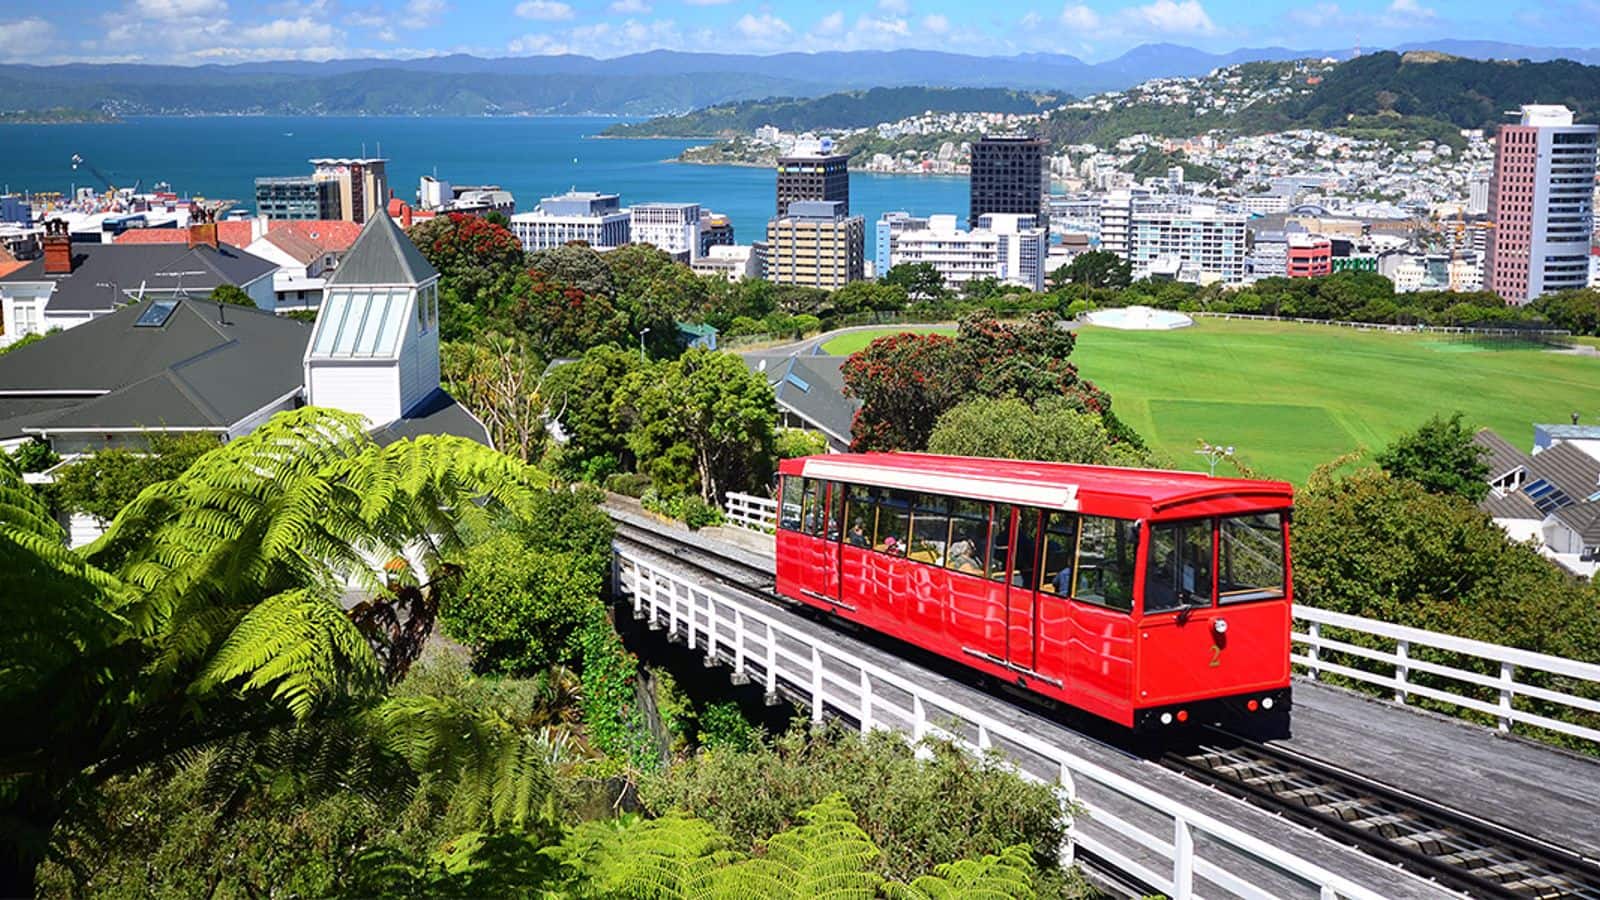 Head over to Wellington's whimsical cable car picnic lookouts